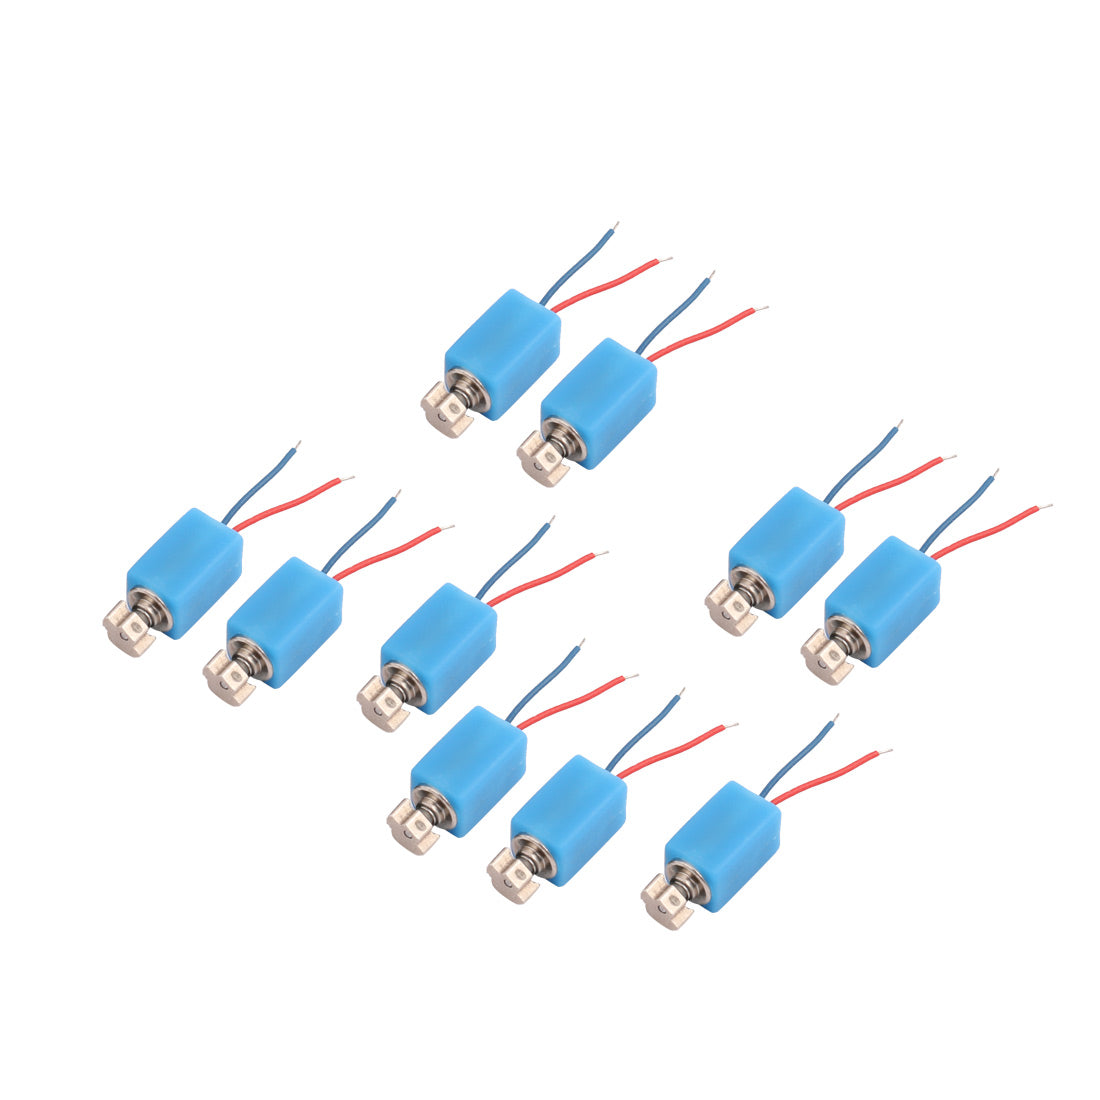 uxcell Uxcell 10 Pcs DC3V 11000RPM Square Mobile Phone 0408 Vibrating Vibration Motor W Wire